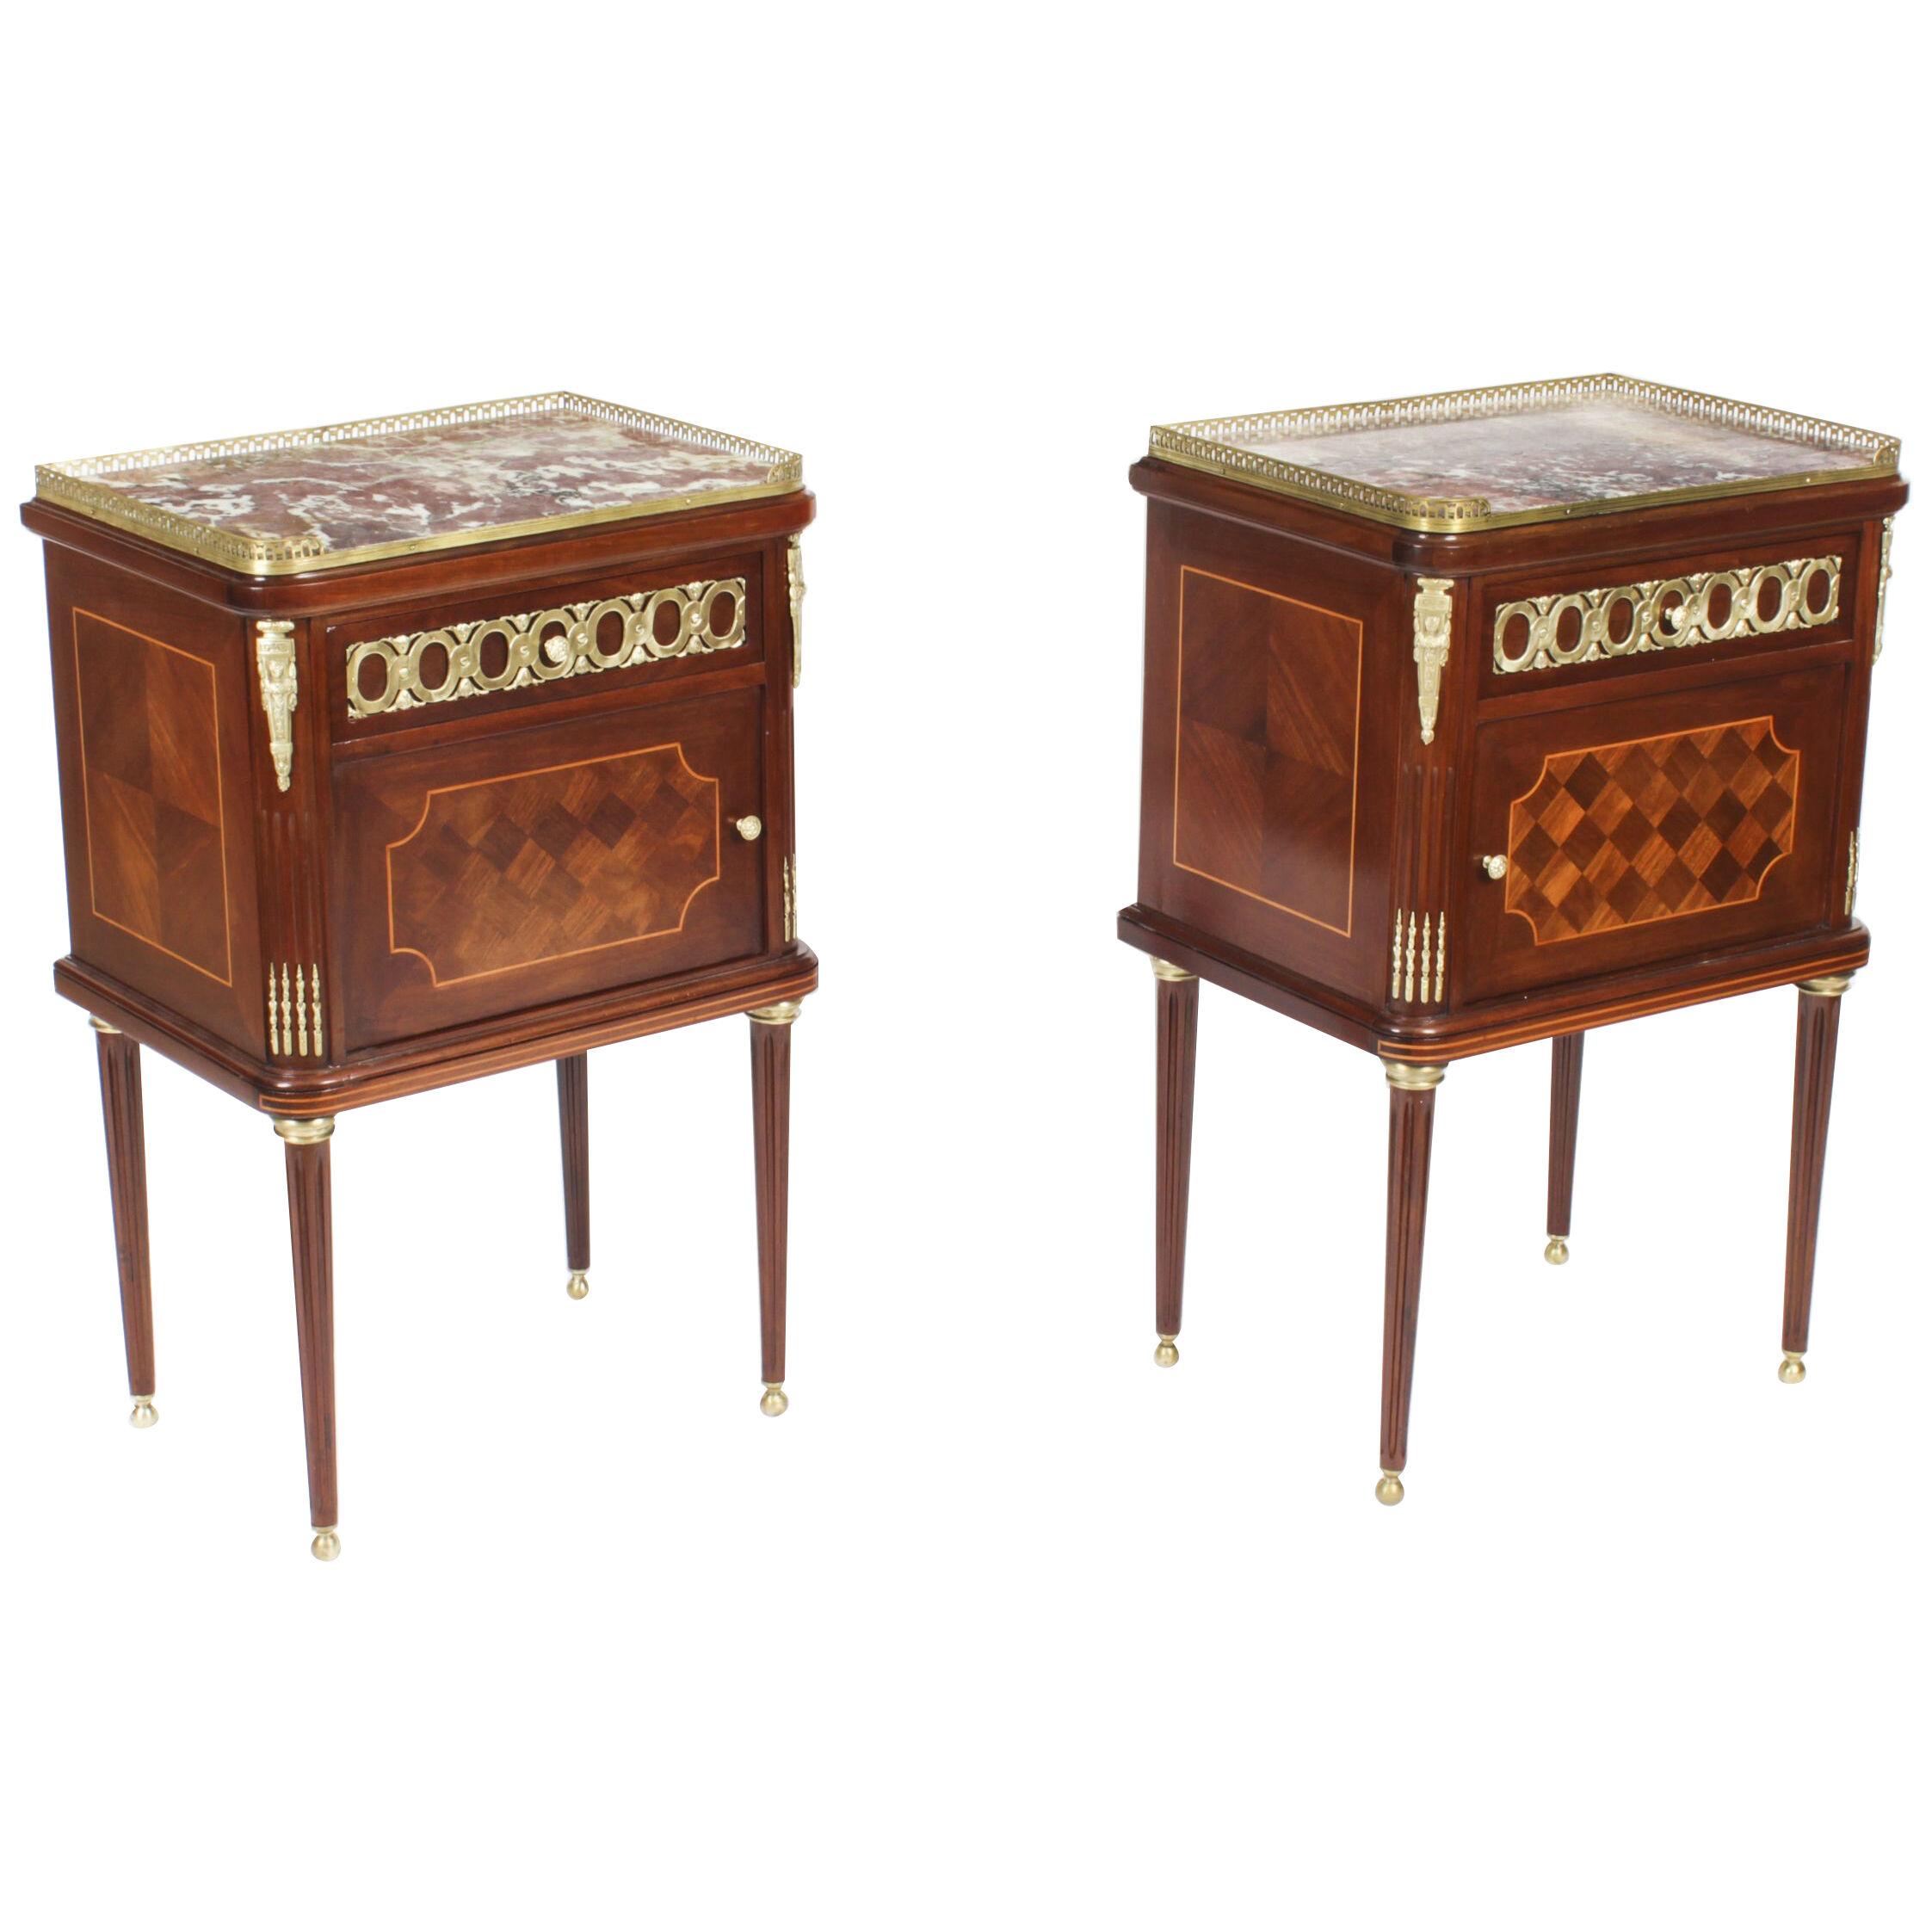 Antique Pair French Empire Style Bedside Cabinets 19th Century